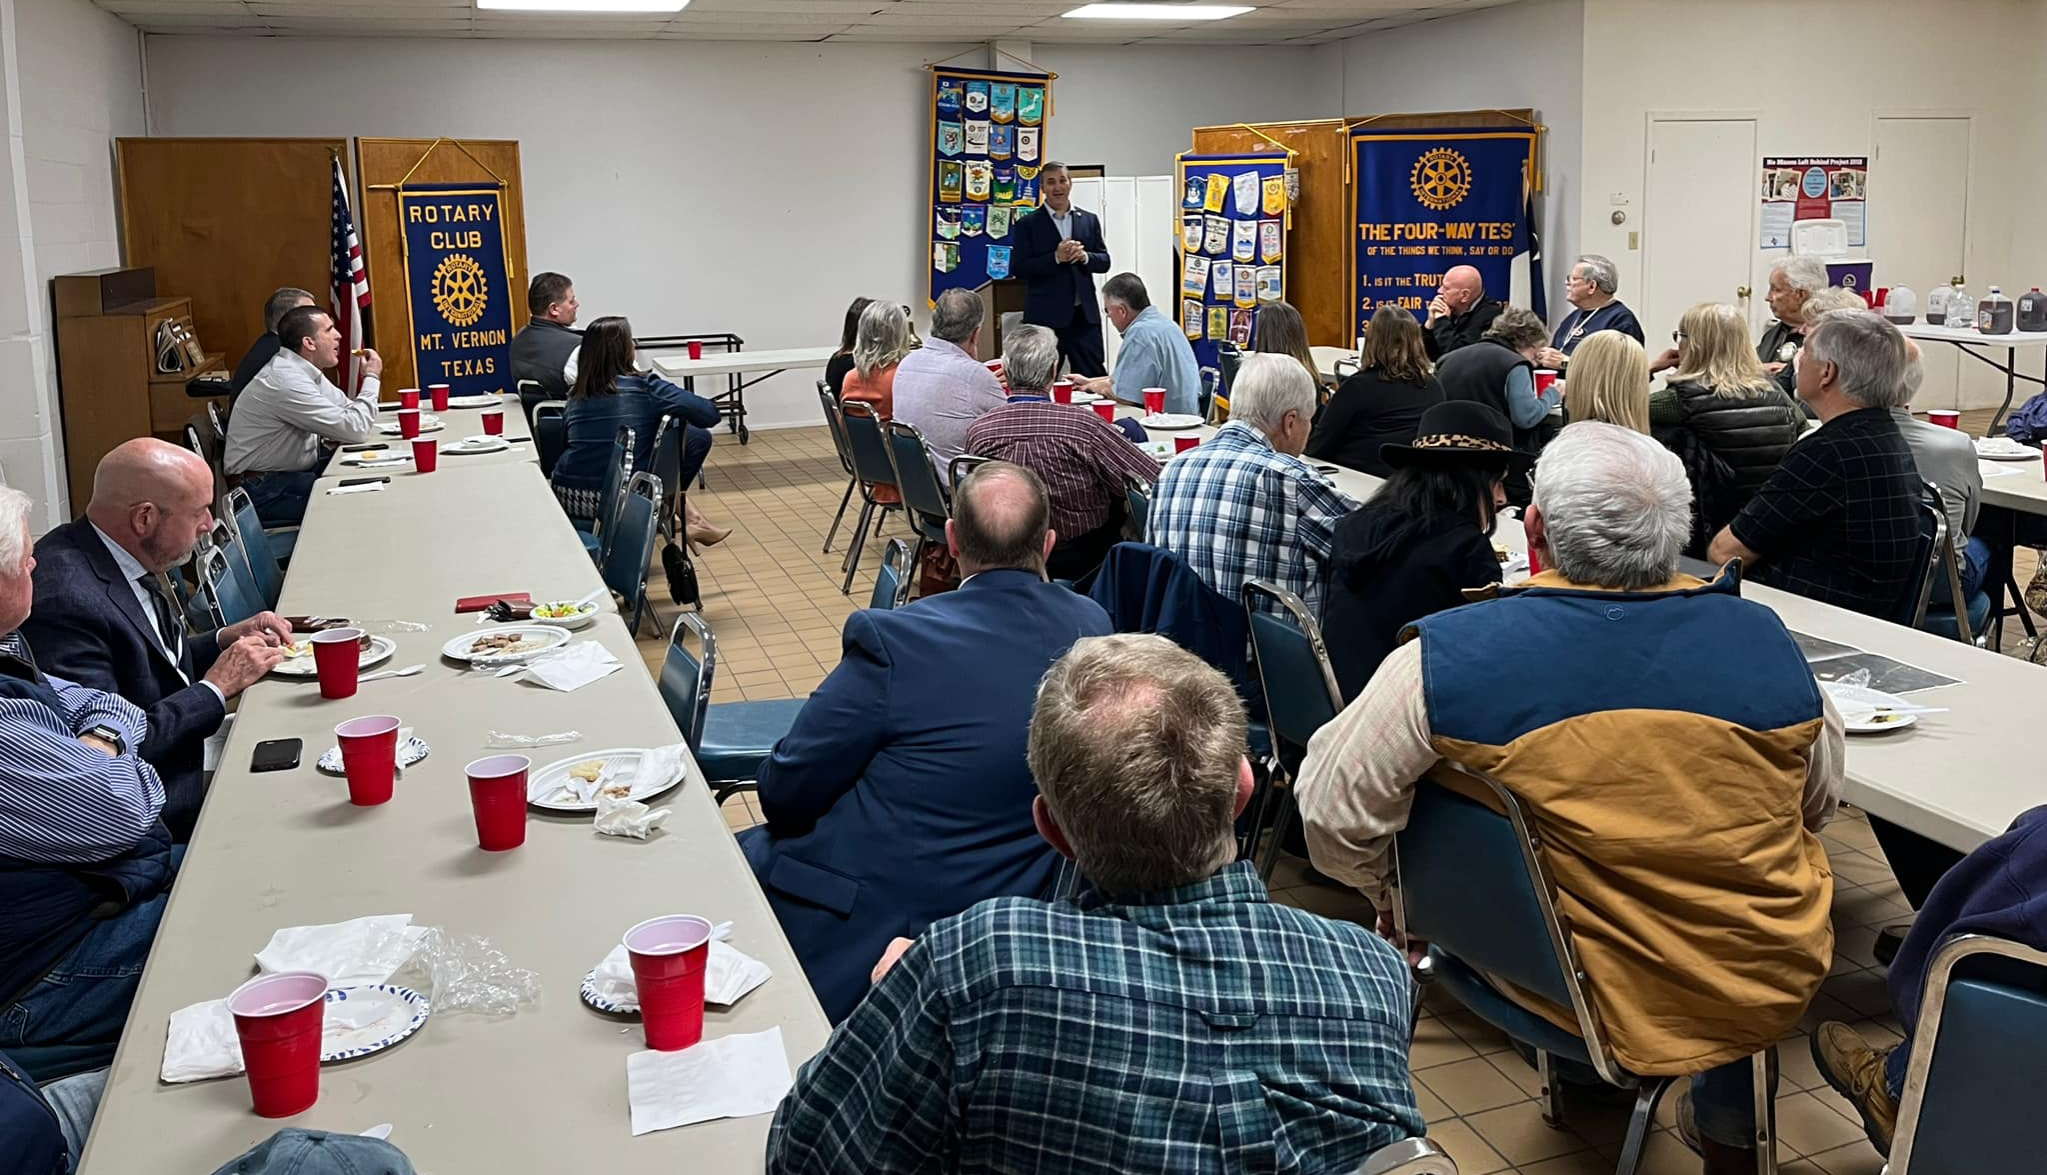 Congressman Nathaniel Moran speaking to members of the Mt. Vernon Rotary Club in Franklin County